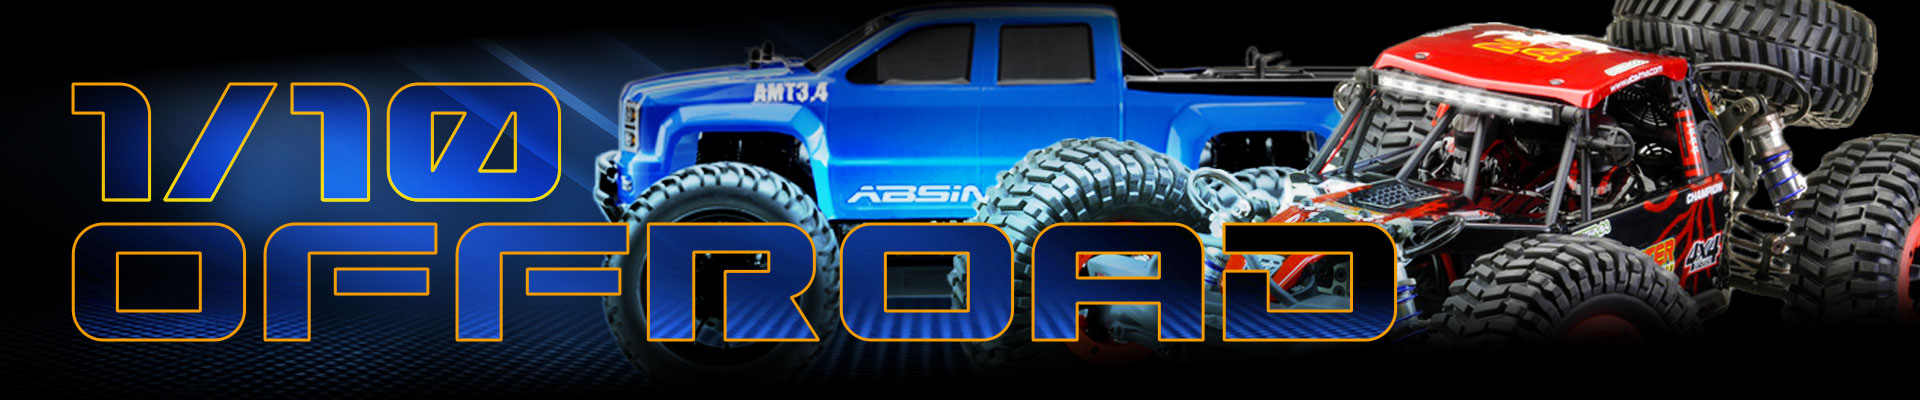 Absima_1to10Offroad_1920x400